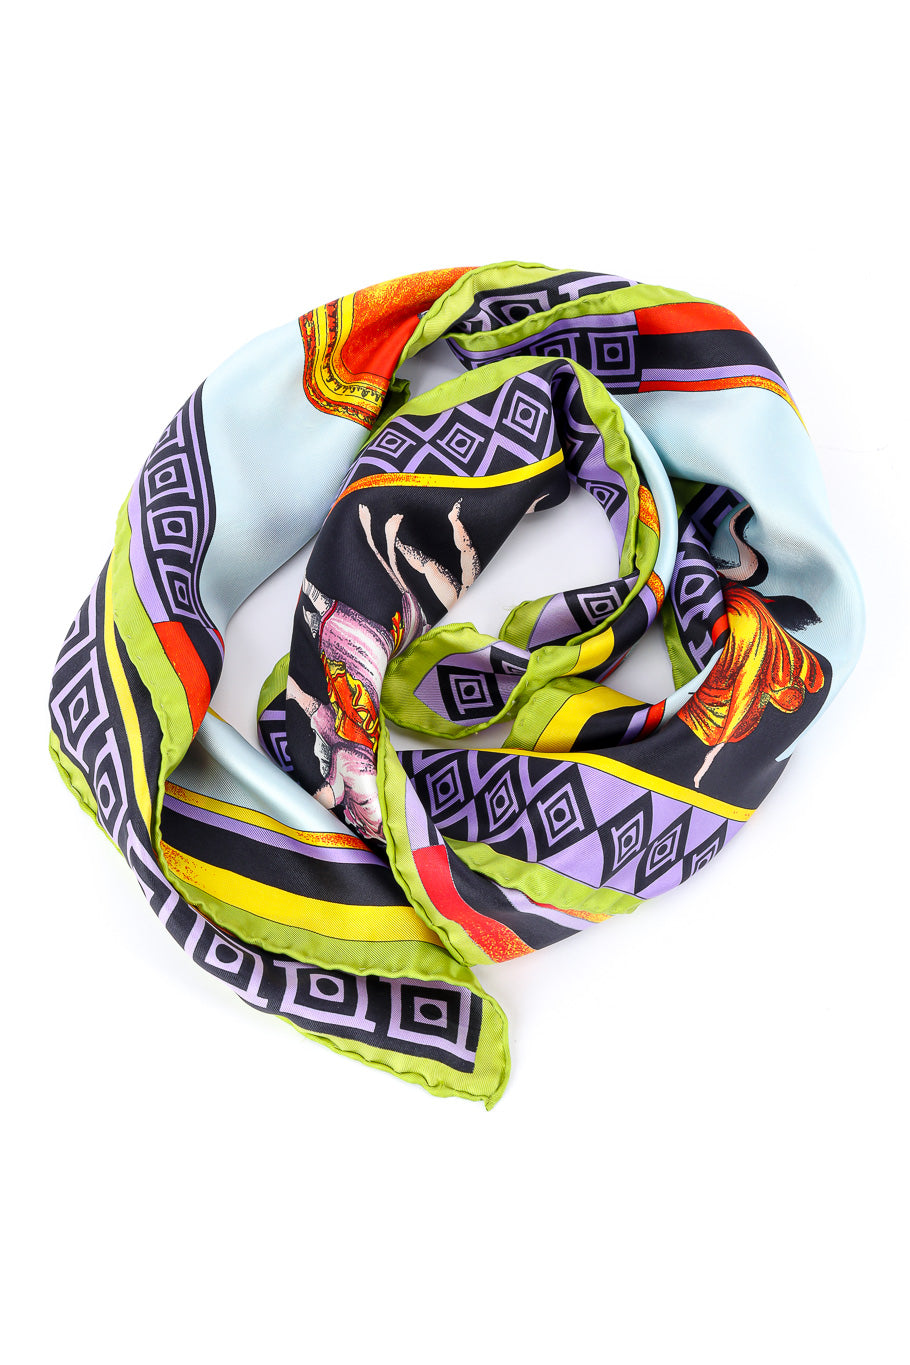 Silk scarf by Gianni Versace flat lay in circle @recessla